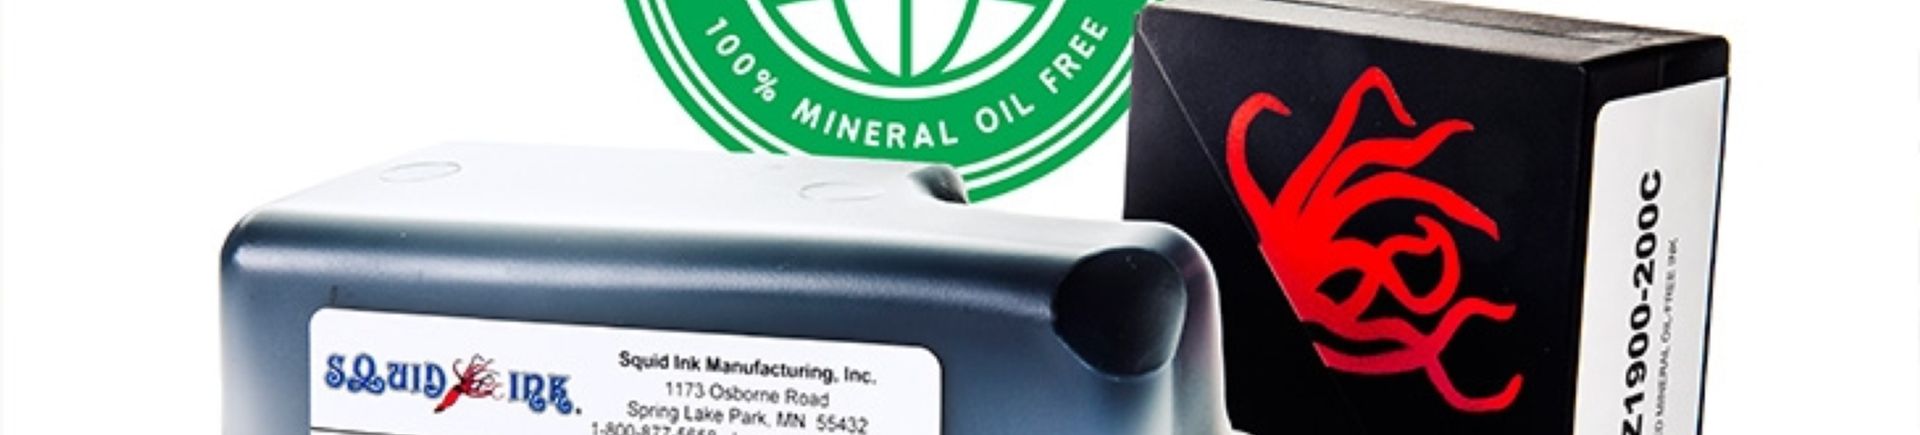 Mineral Oil Free Inks